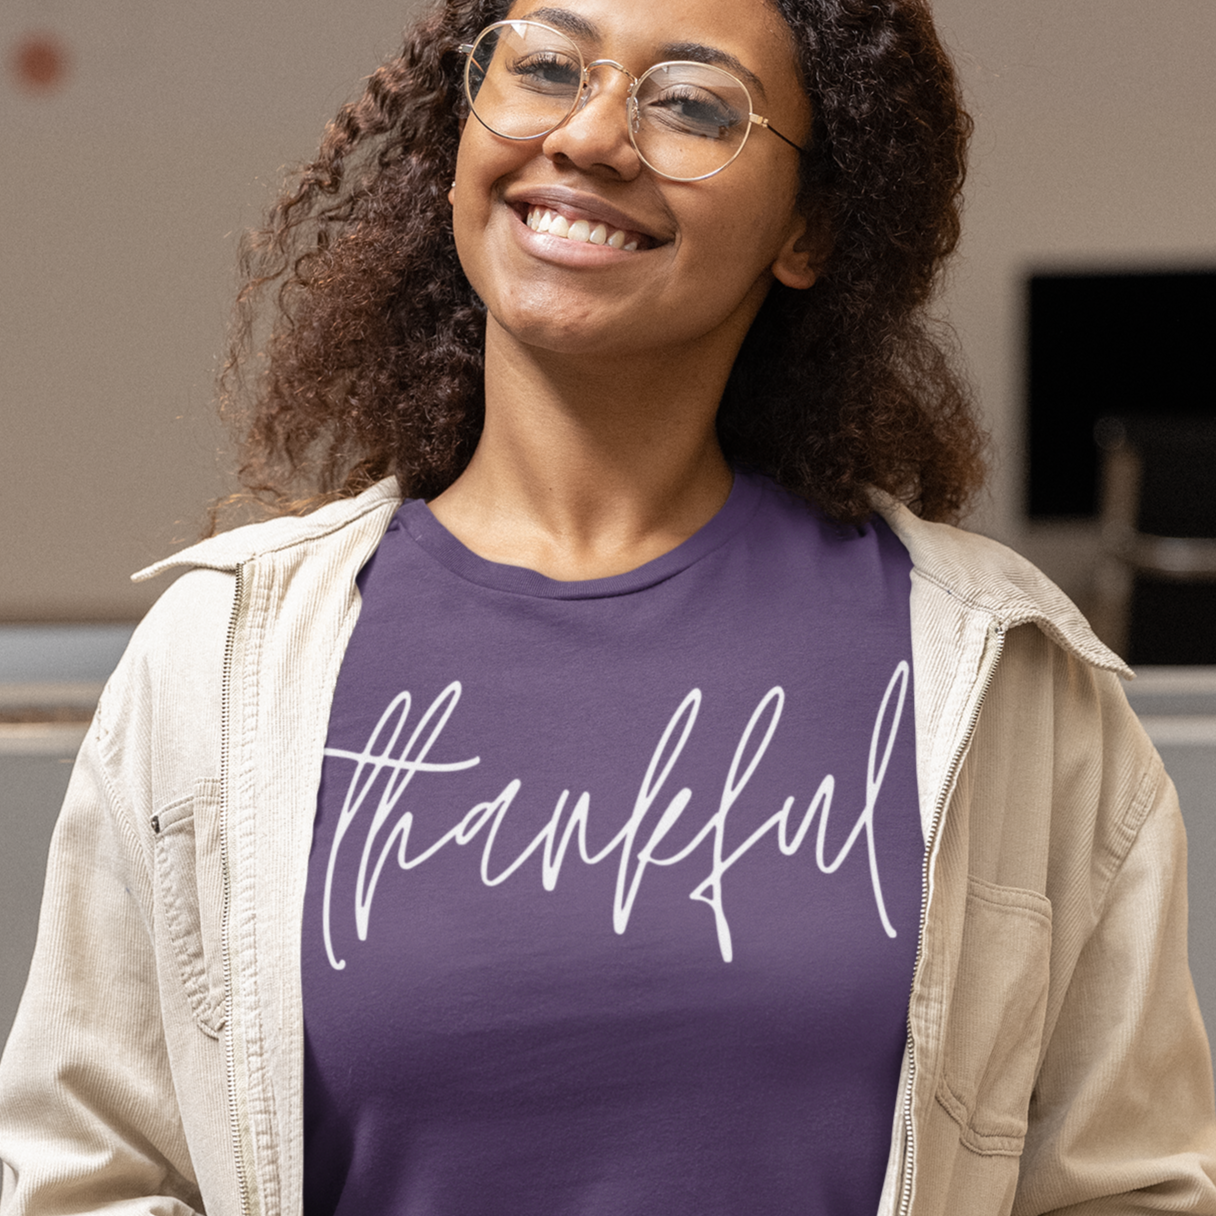 thankful-team-purple-t-shirt-womens-inspiring-mockup-of-a-happy-woman-wearing-a-bella-canvas-tee-and-a-jacket